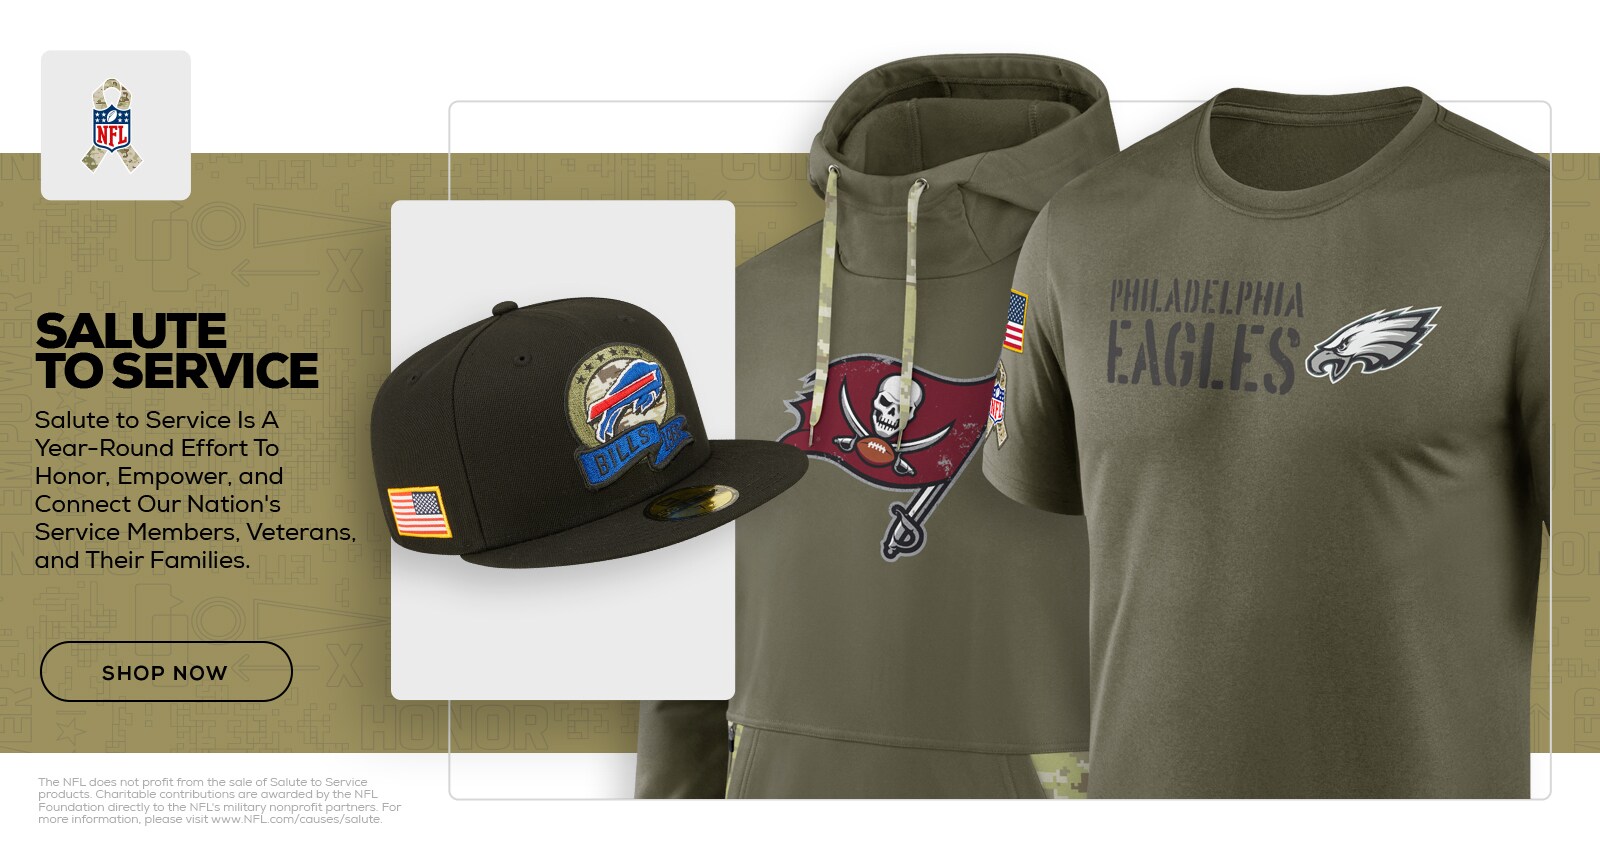 SALUTE TO SERVICE. Salute to Service Is A Year-Round Effort To Honor, Empower, and Connect Our Nation's Service Members, Veterans, and Their Families. Shop Now.